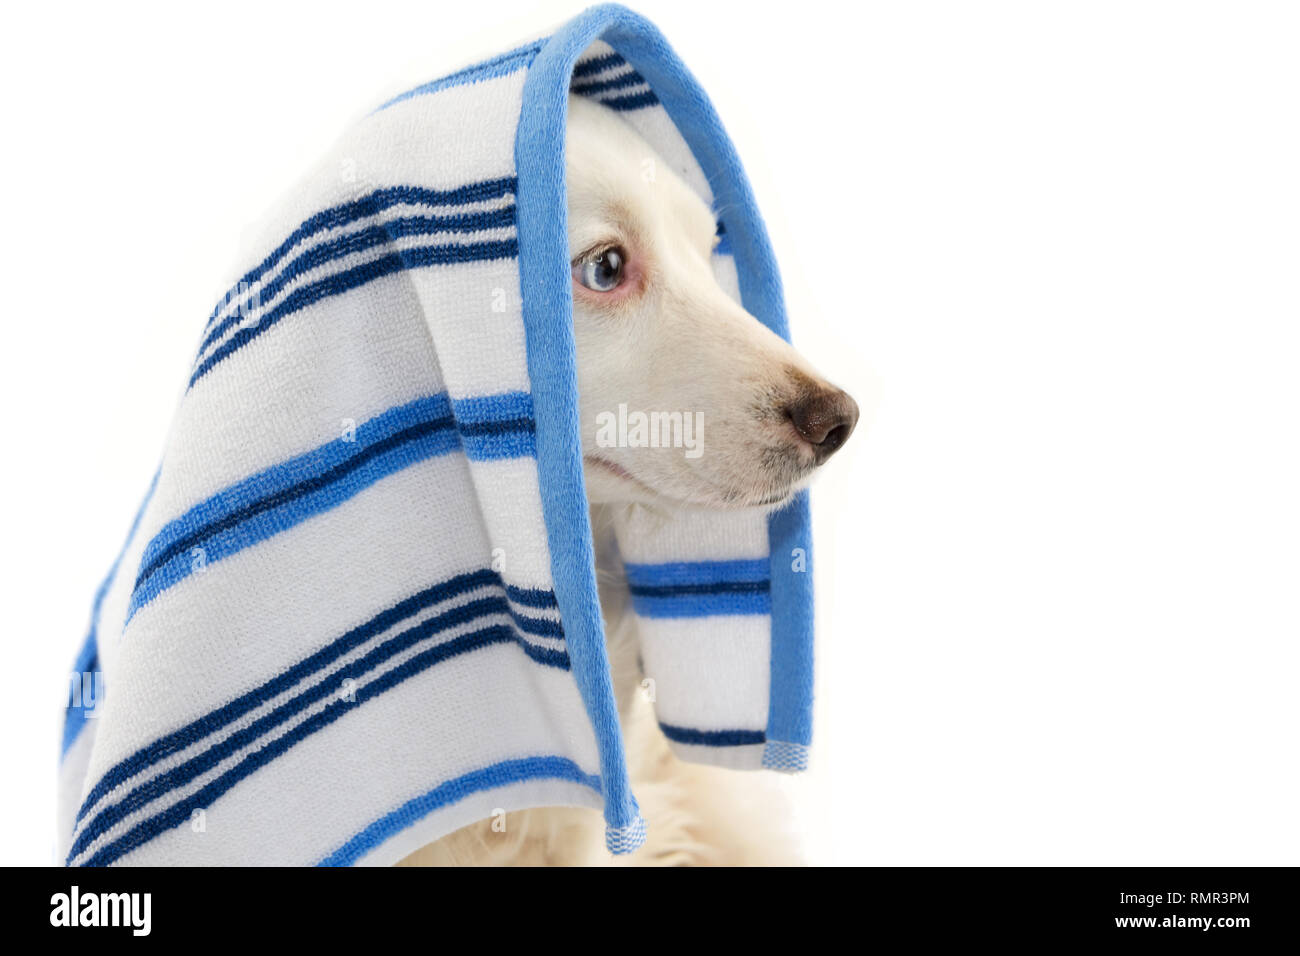 PROFILE DOG BATHING. MIXED-BREED PUPPY WRAPPED WITH A BLUE COLORED TOWEL. ISOLATED STUDIO SHOT AGAINST WHITE BACKGROUND. Stock Photo